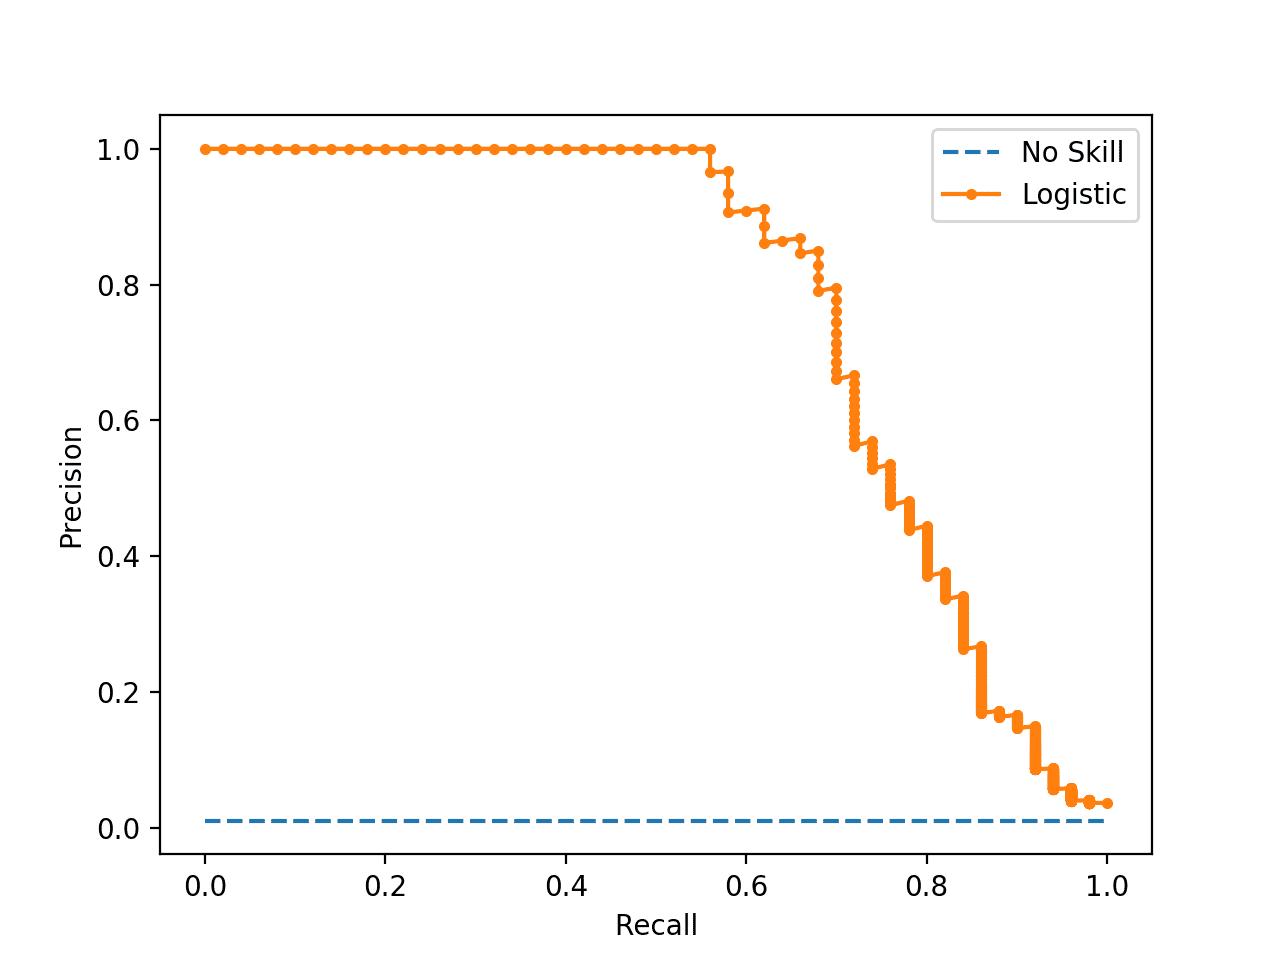 Precision-Recall Curve Line Plot for Logistic Regression Model for Imbalanced Classification